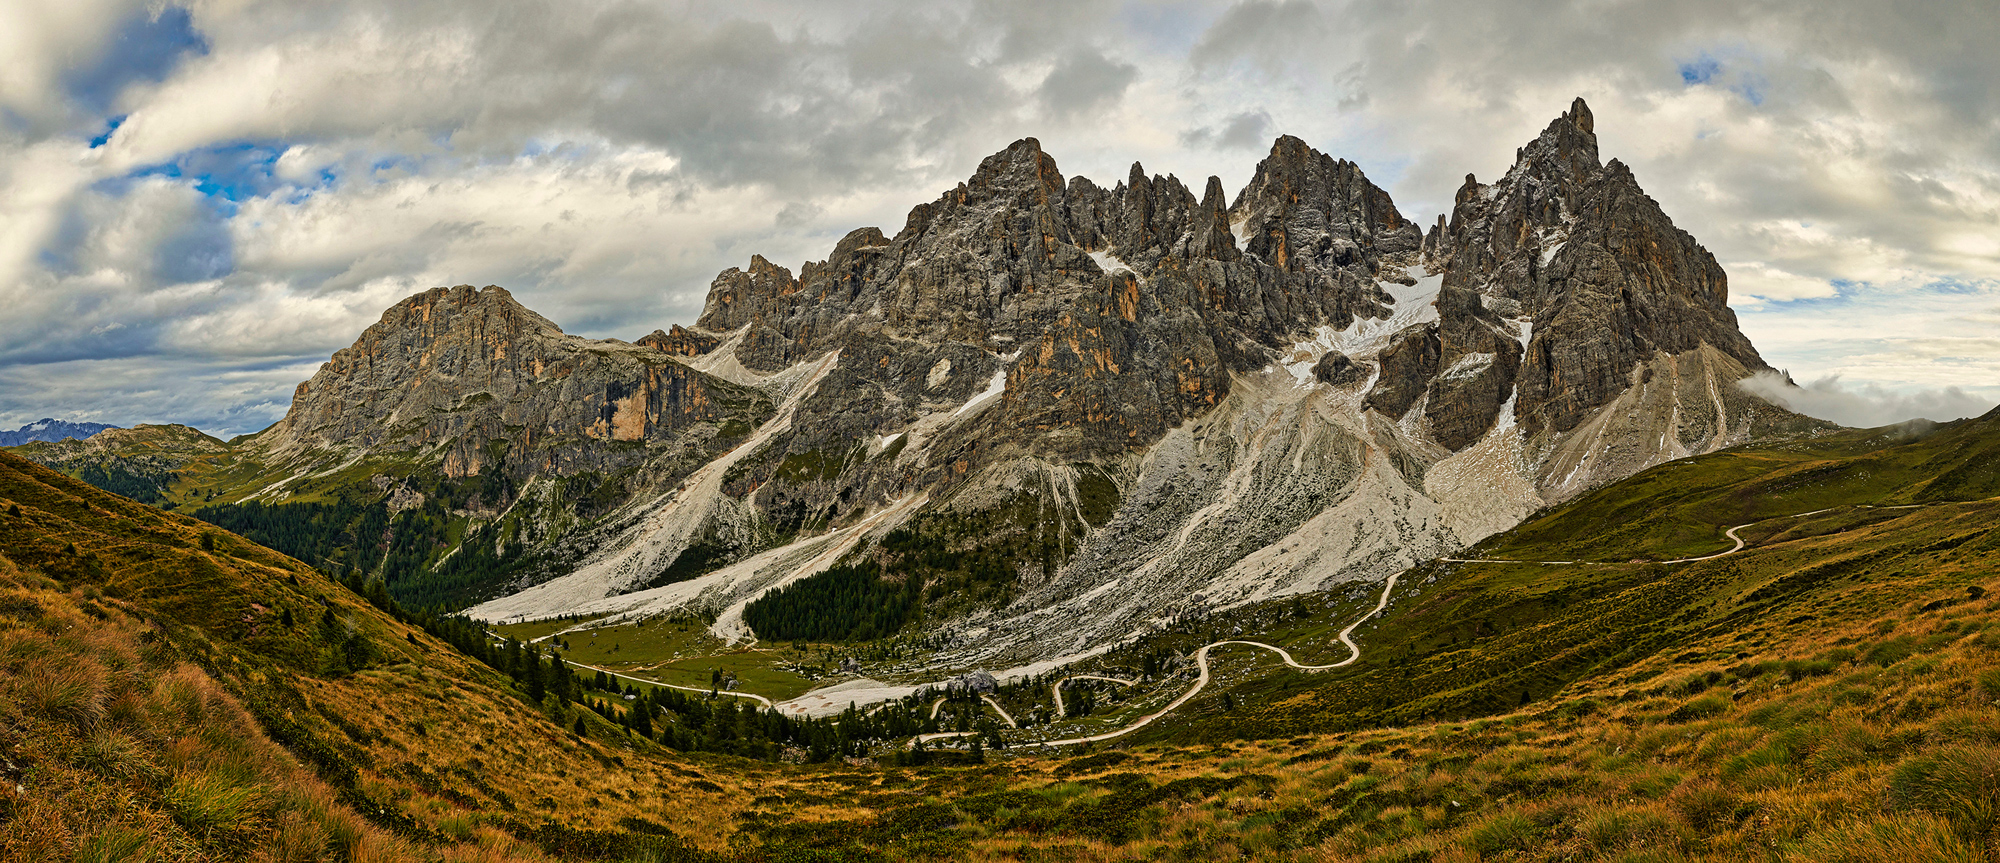 38 image 3 row stitch in the Dolomites. Sony a7r iii with 24-70mm. I was pretty clost. A 16mm lens would not have shown the whole image. That is what sometimes you need to do an image stict so you can show everything